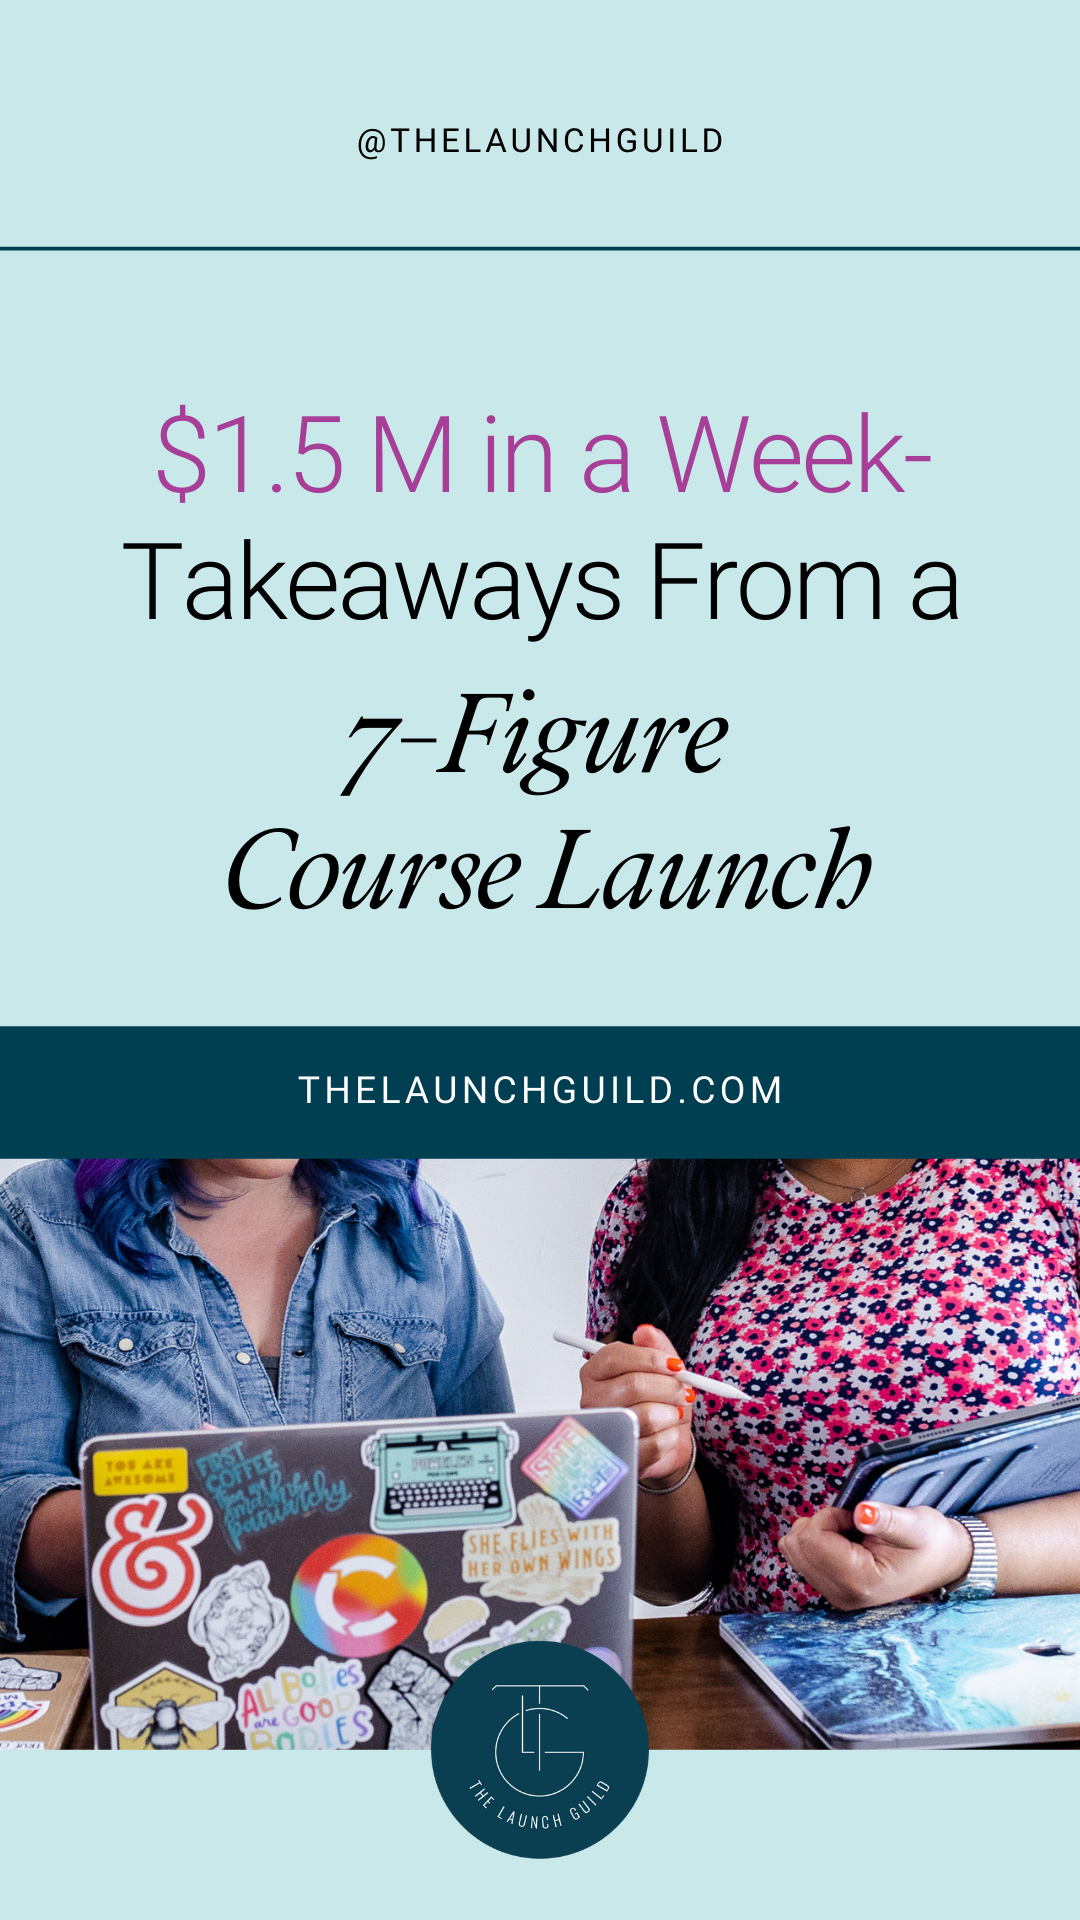 (TLG) $1.5M in a Week - Takeaways From a 7-Figure Course Launch - TLG Blog